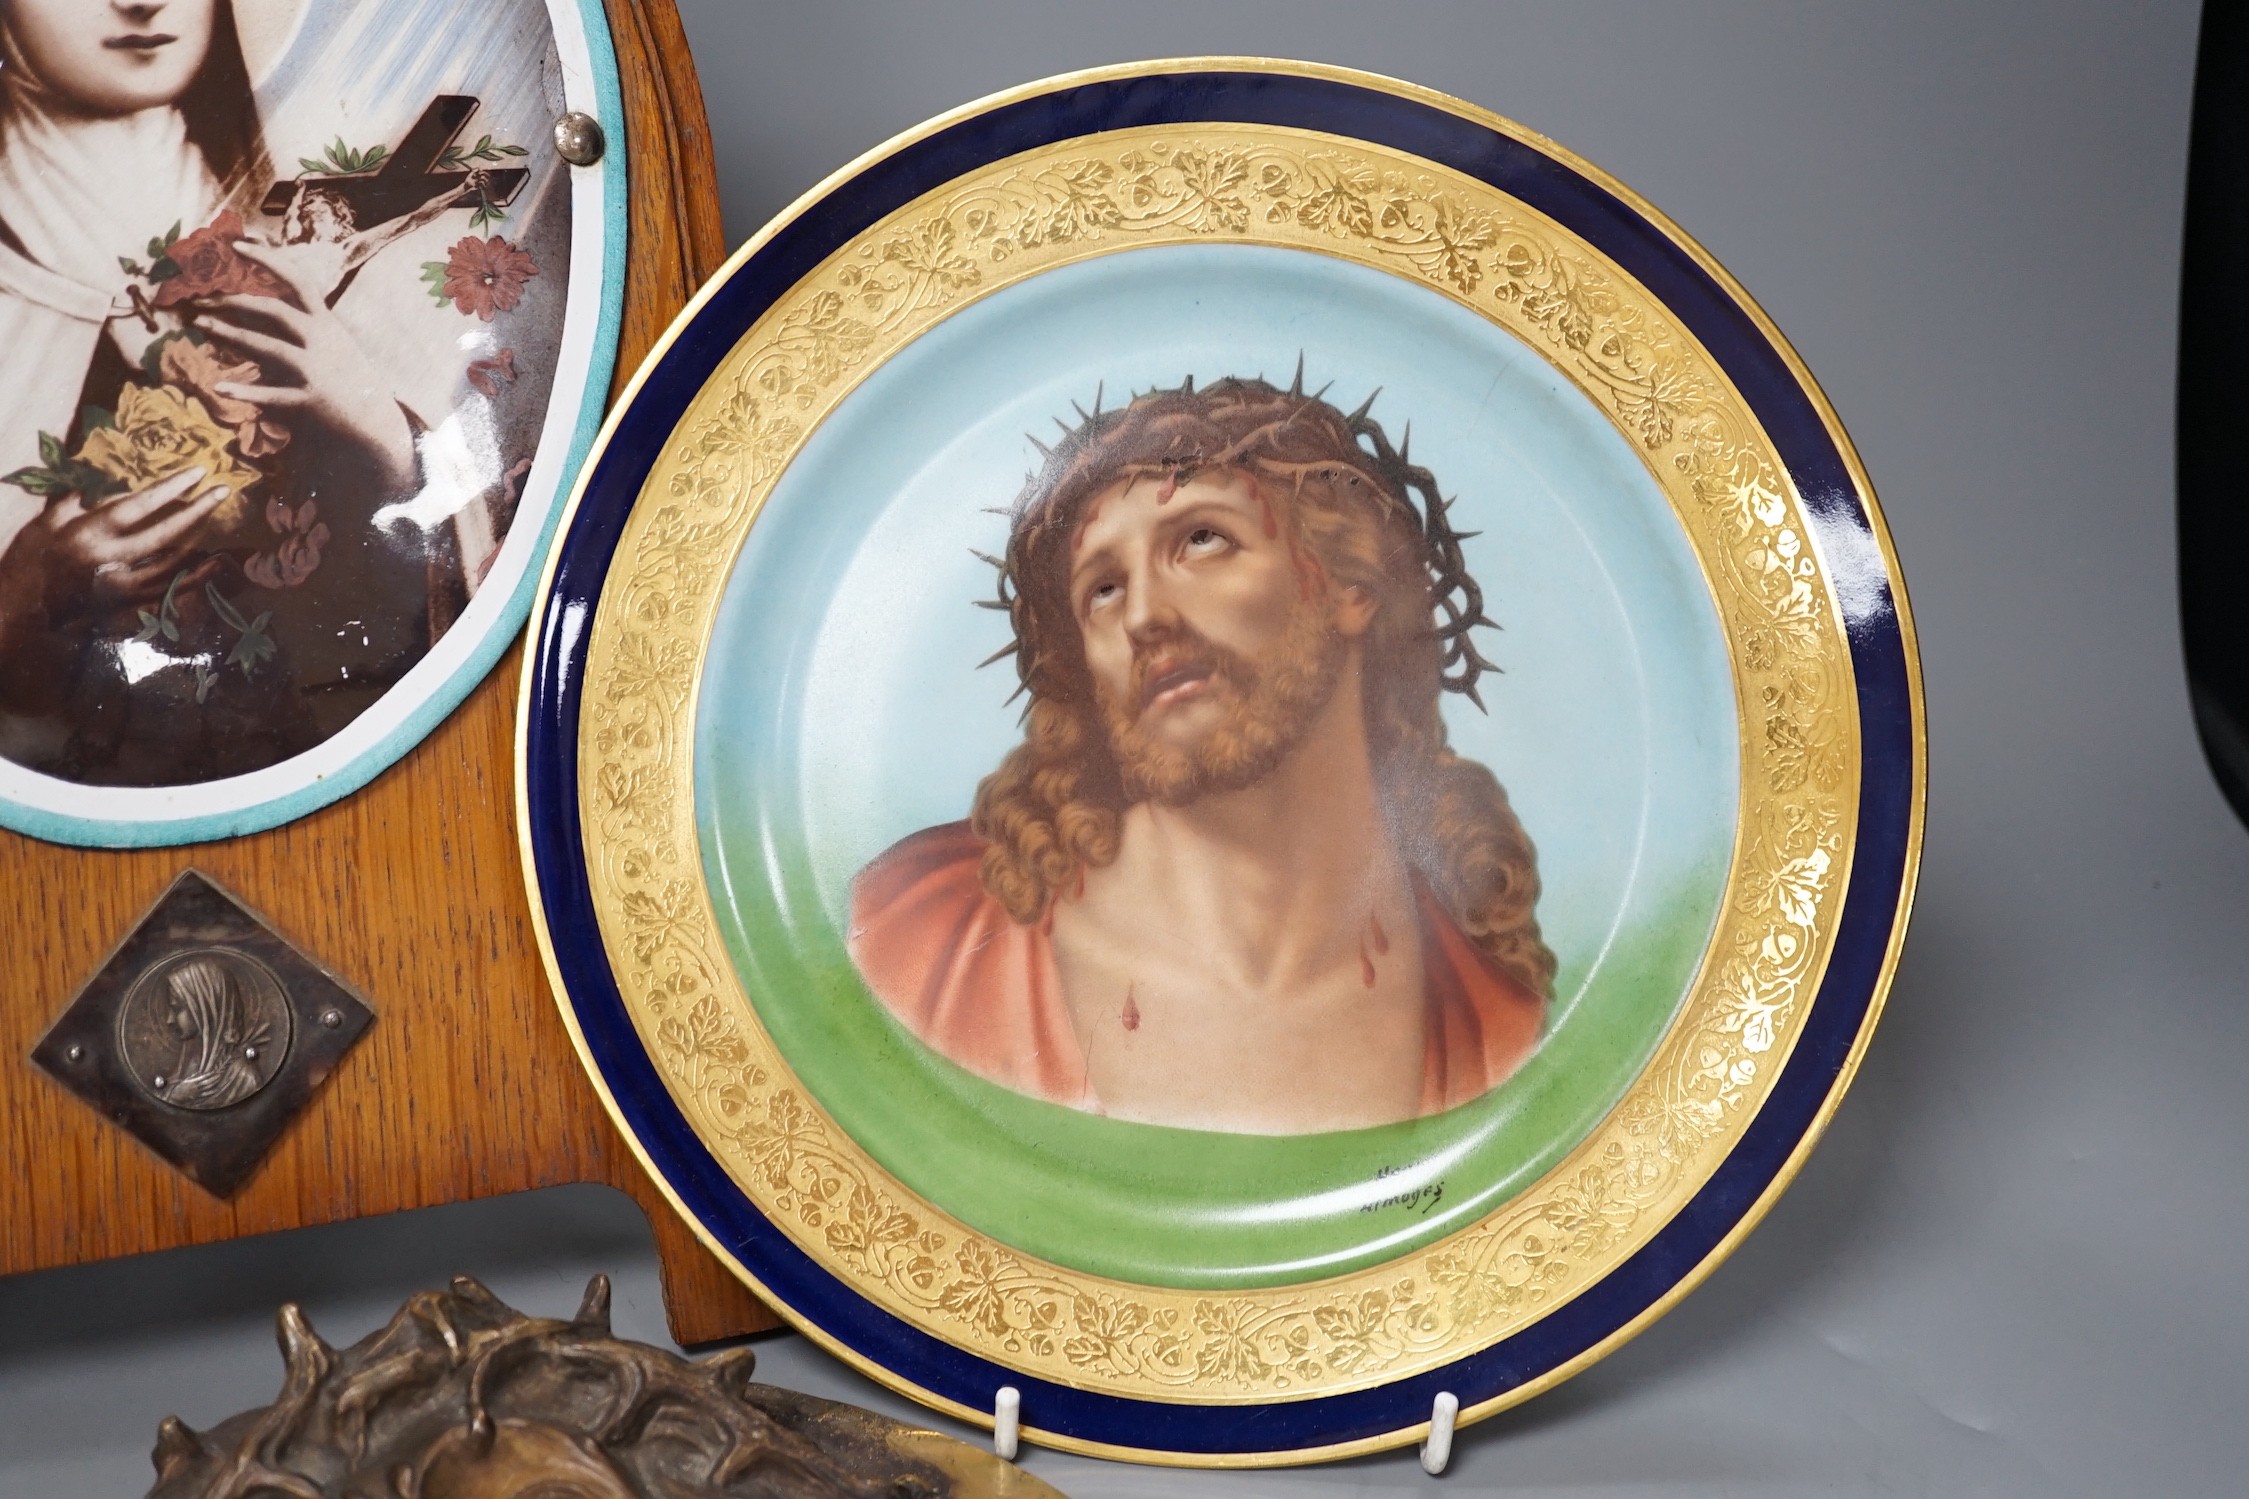 A Limoges plate and cast bronze portrait of Christ with crown of thorns and a framed plaque of the Madonna, frame 37 cms high